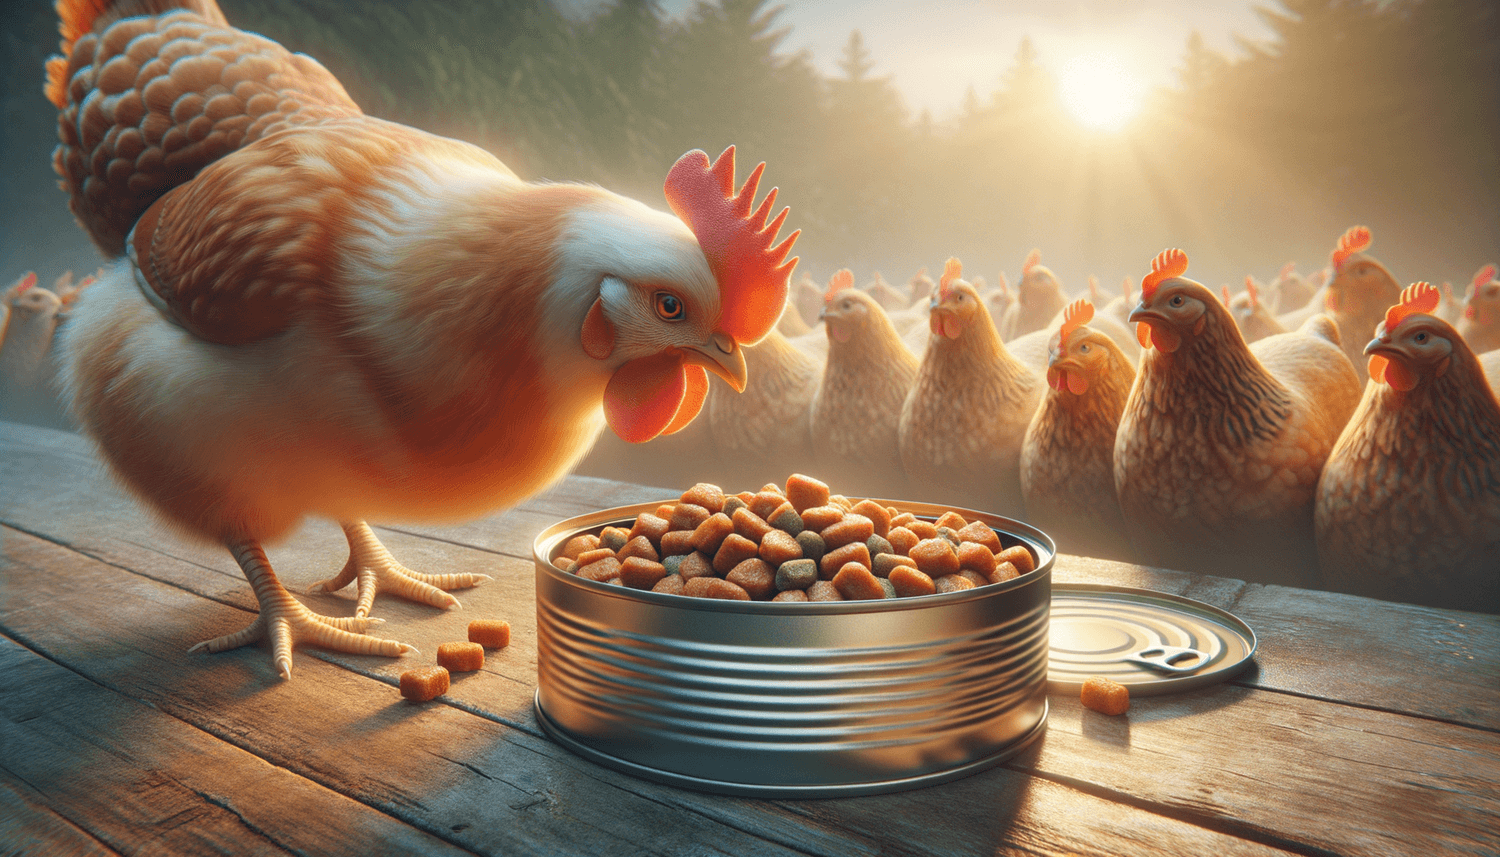 Can Chickens Eat Canned Dog Food?